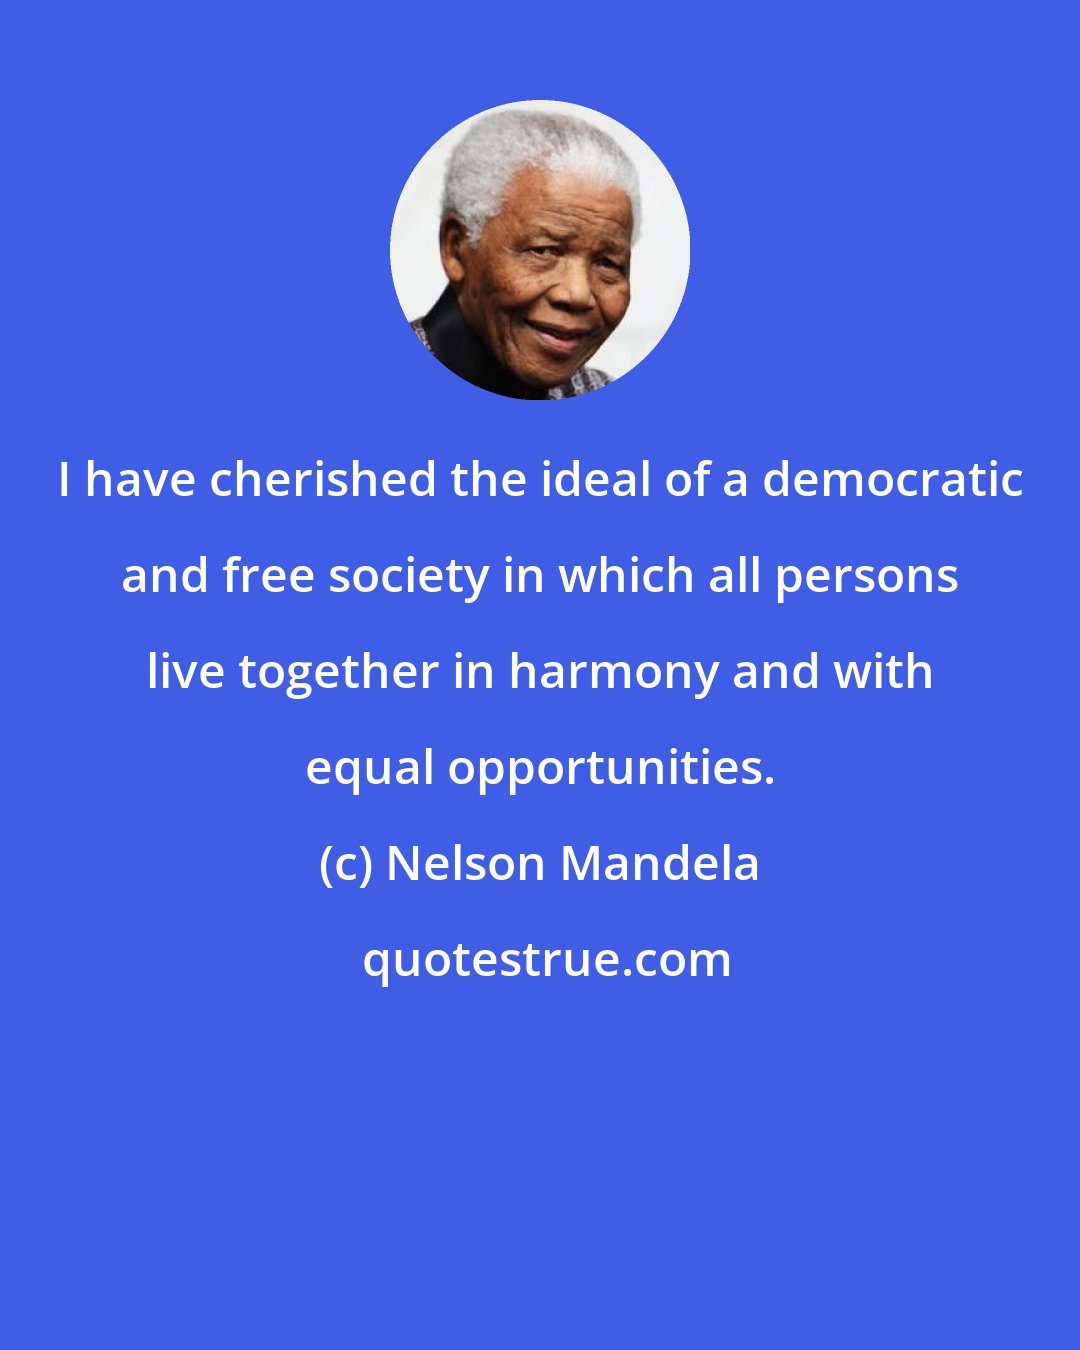 Nelson Mandela: I have cherished the ideal of a democratic and free society in which all persons live together in harmony and with equal opportunities.